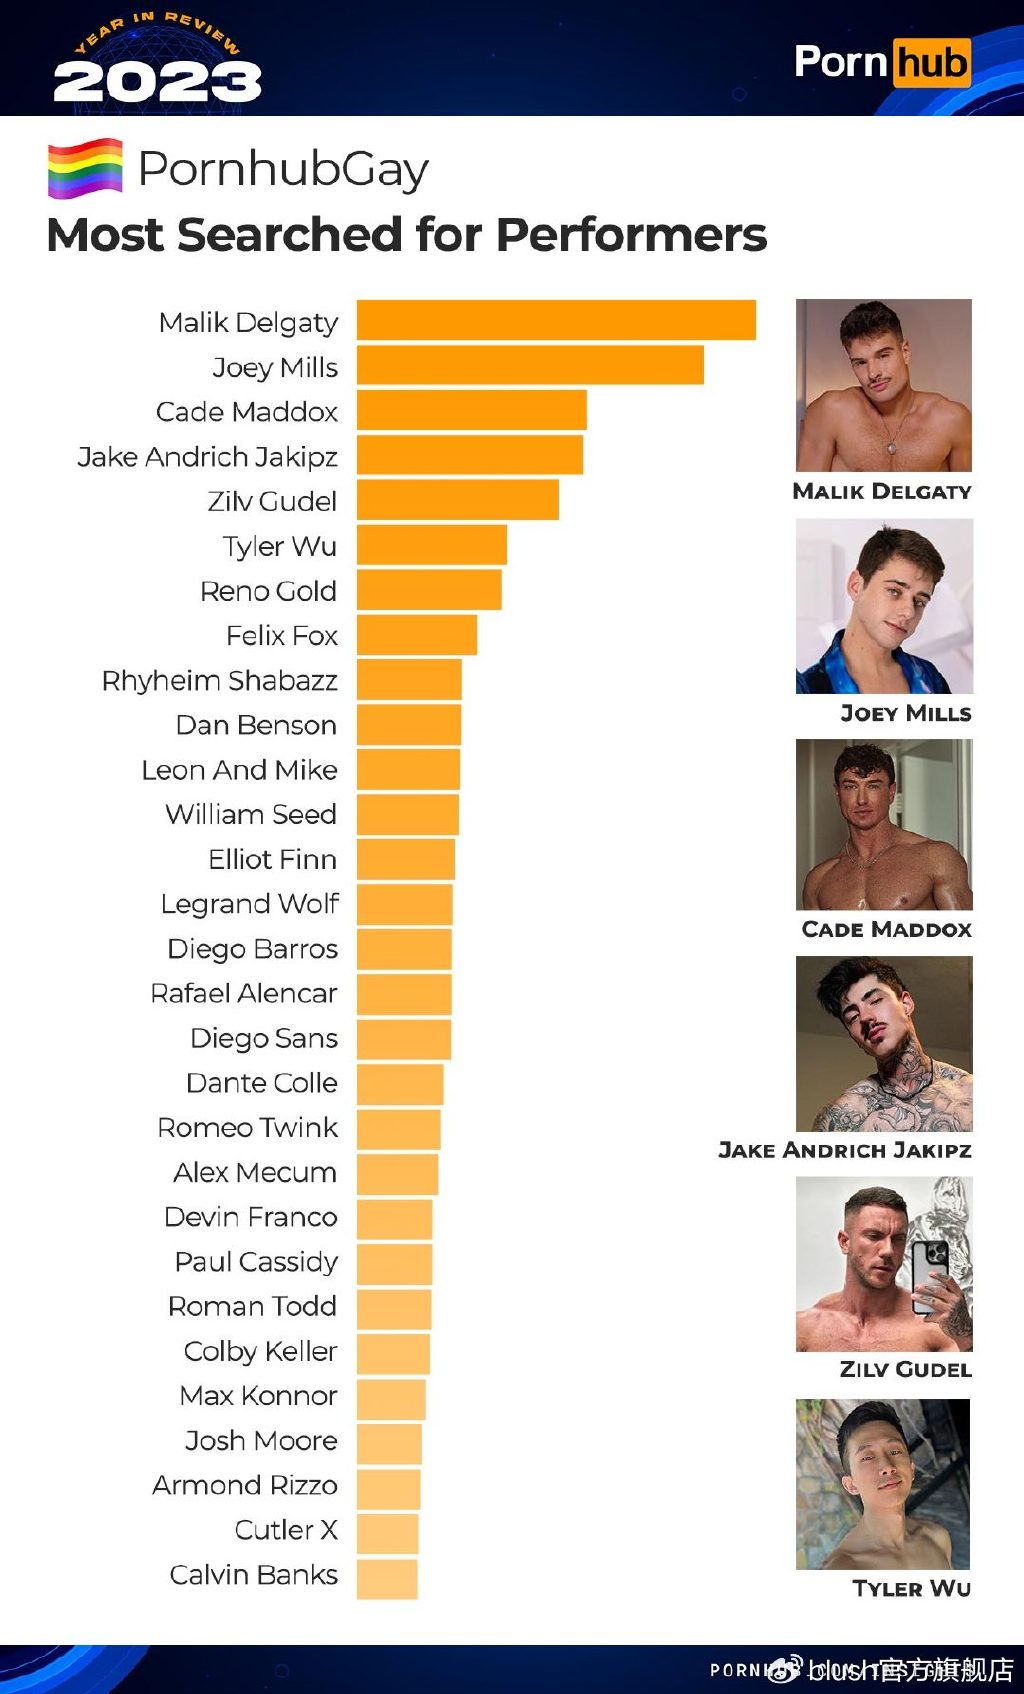 pornhub-insights-2023-year-in-review-gay-most-searched-performers.jpg